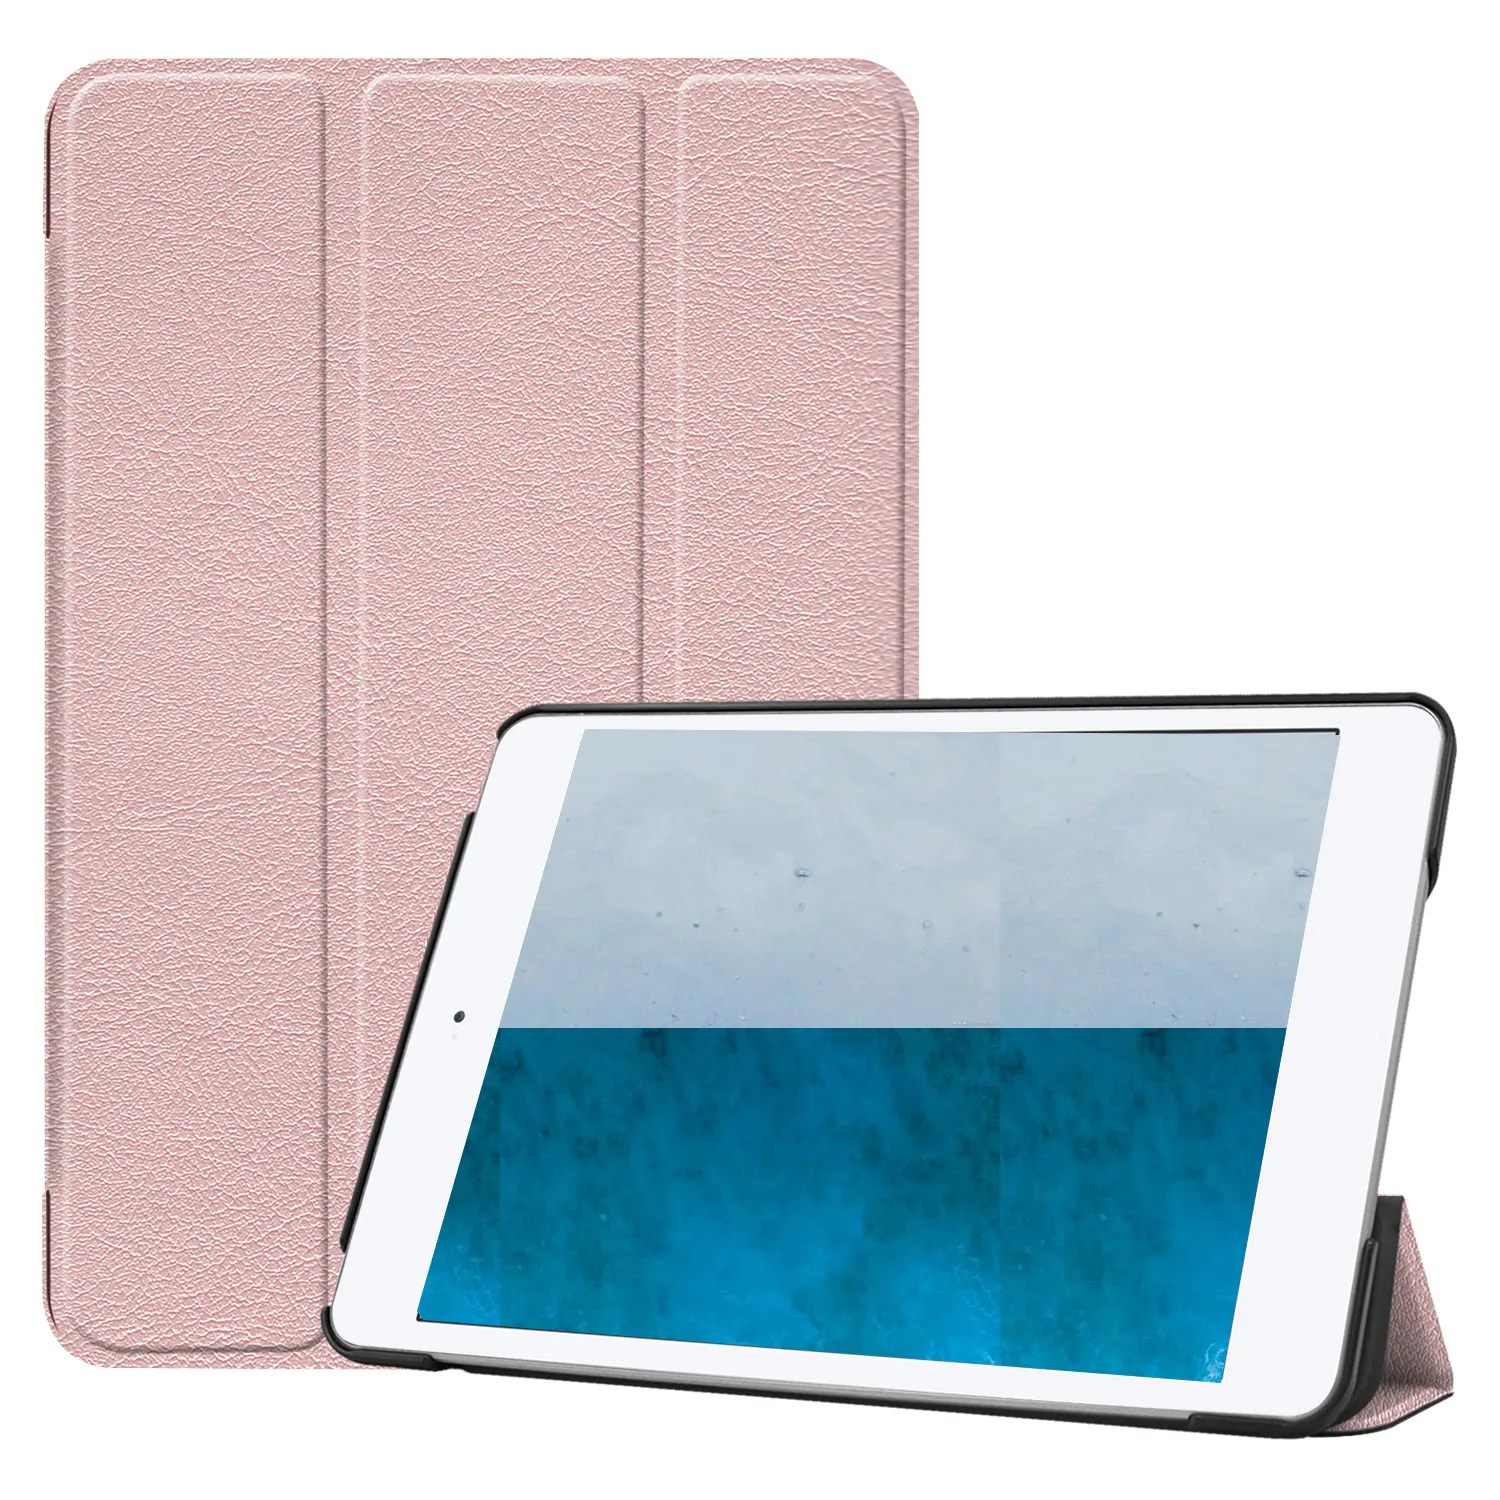 Quality PU Leather tablet covers cases For iPad Mini 5th Generation 2019